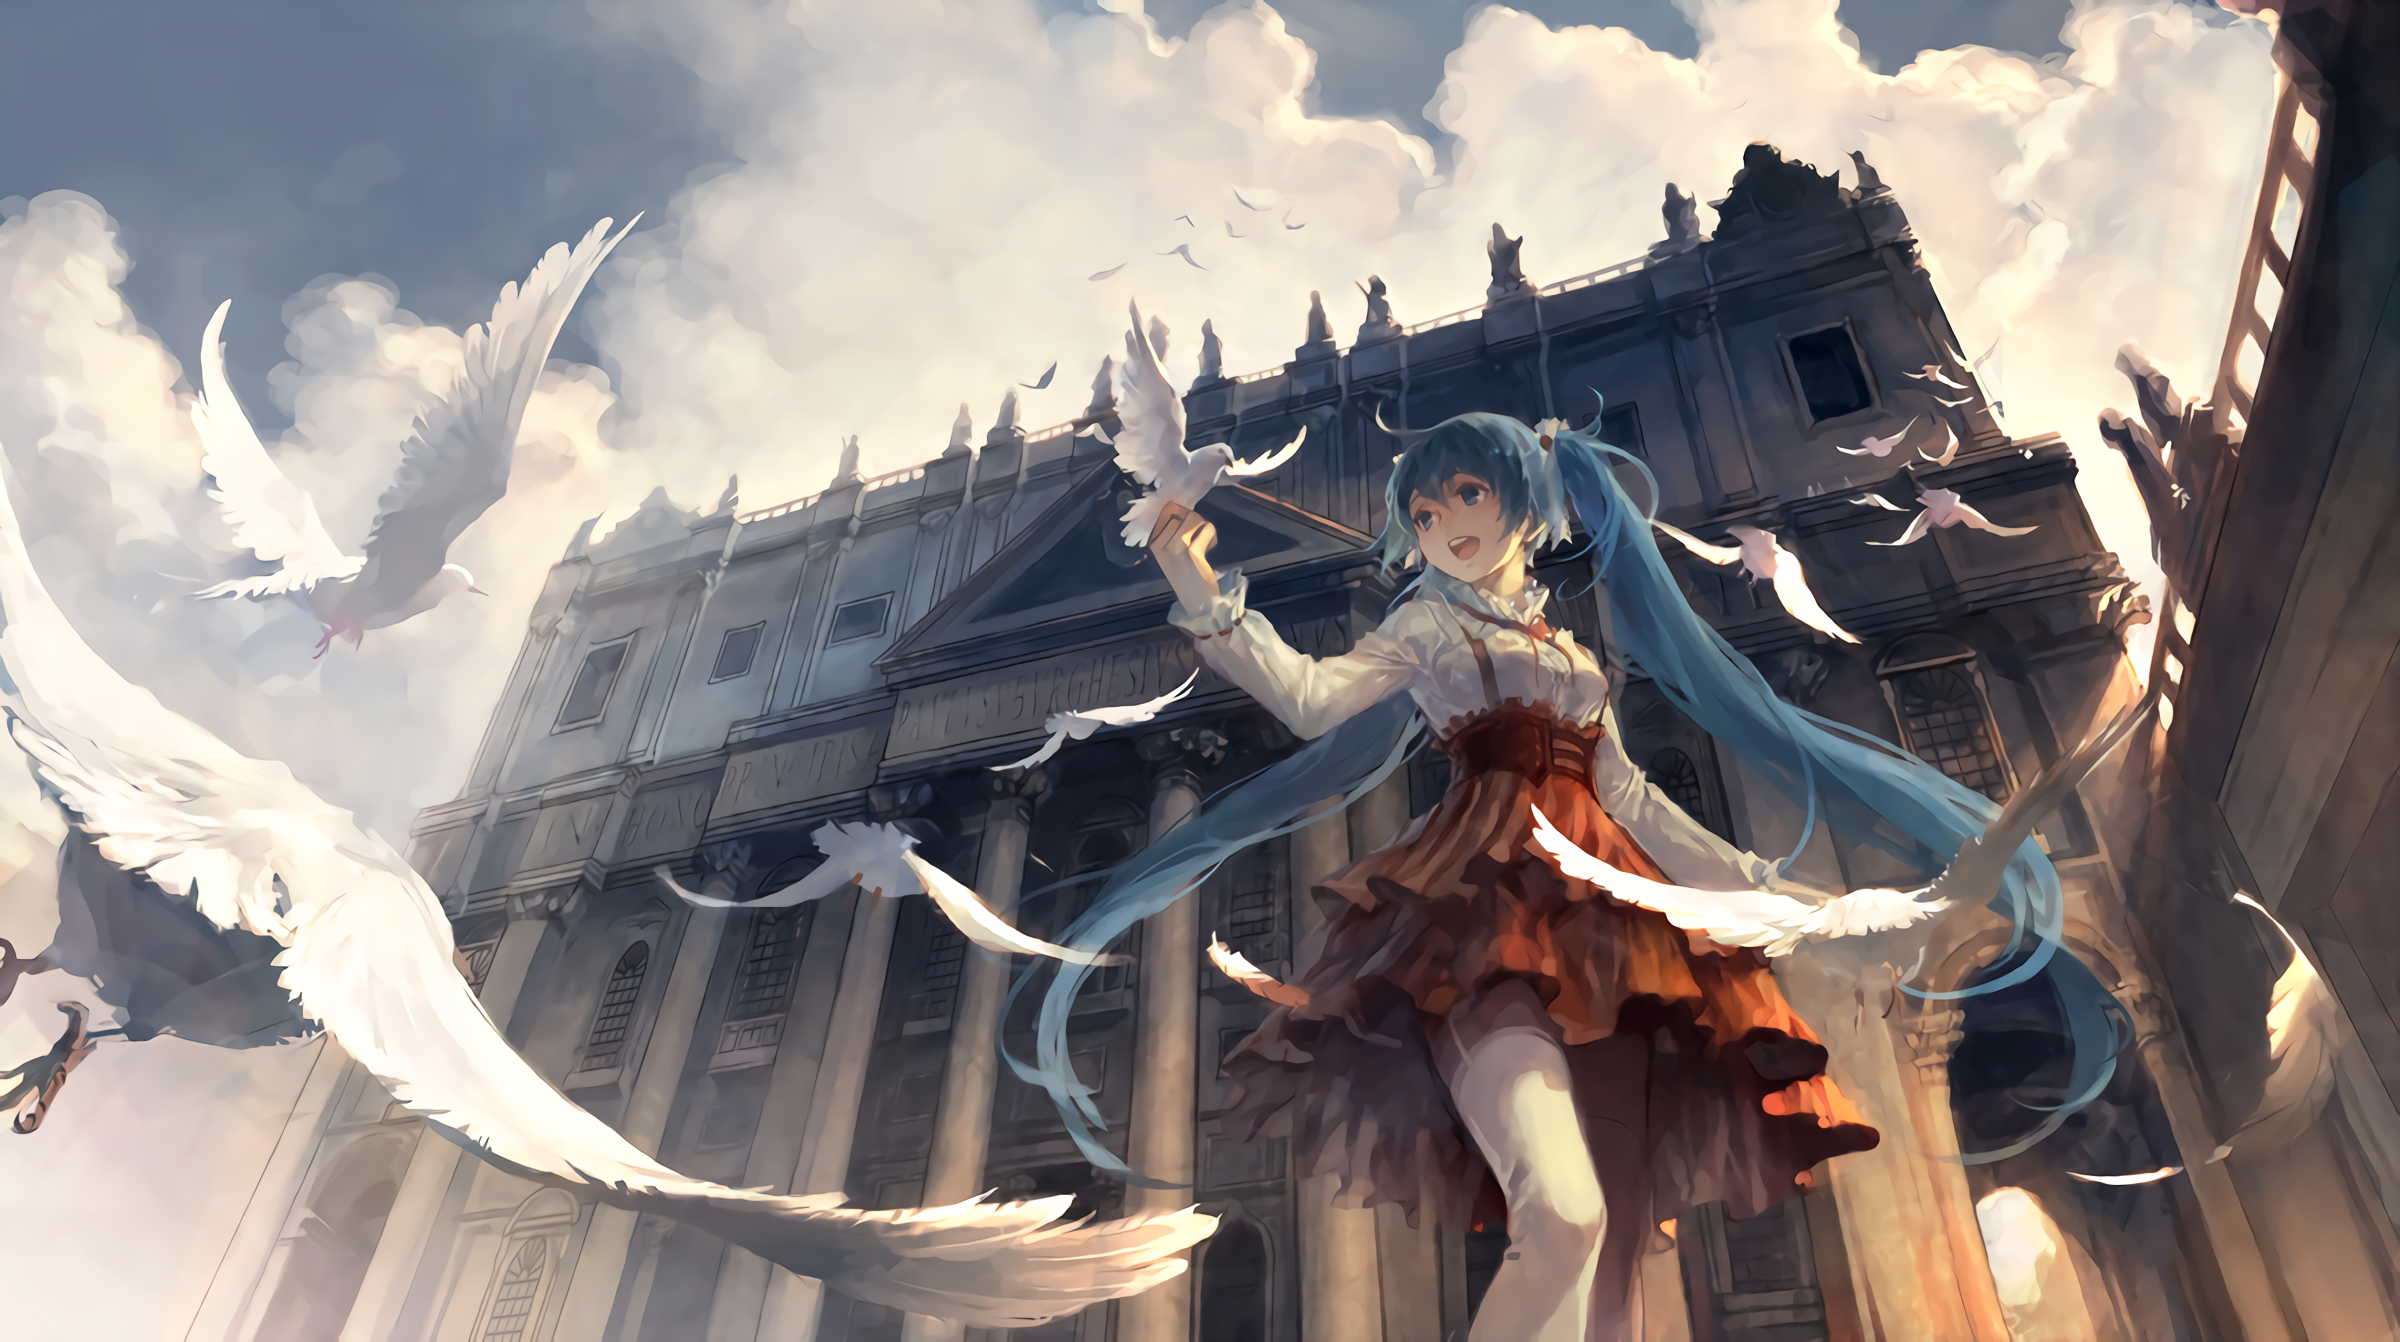 Anime Vocaloid HD Wallpaper by Silverwing